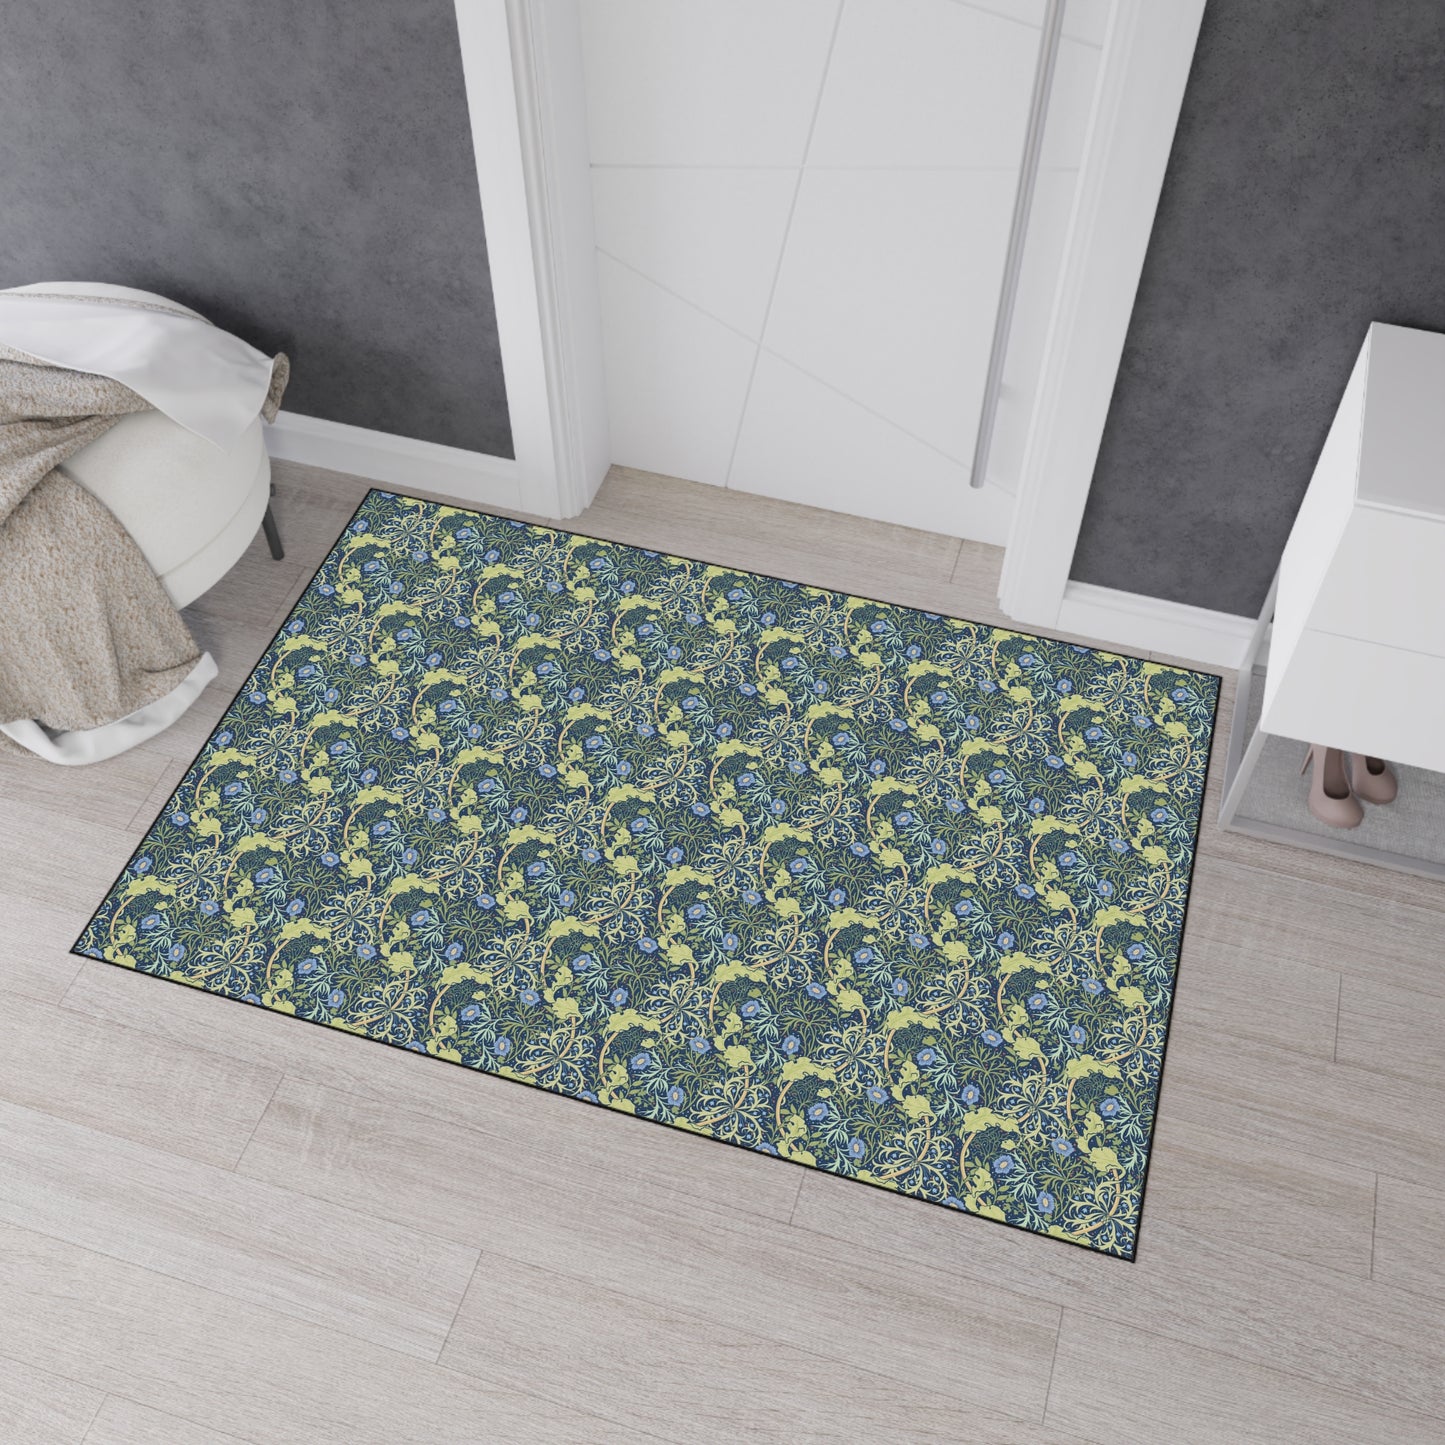 william-morris-co-heavy-duty-floor-mat-seaweed-collection-blue-flowers-9